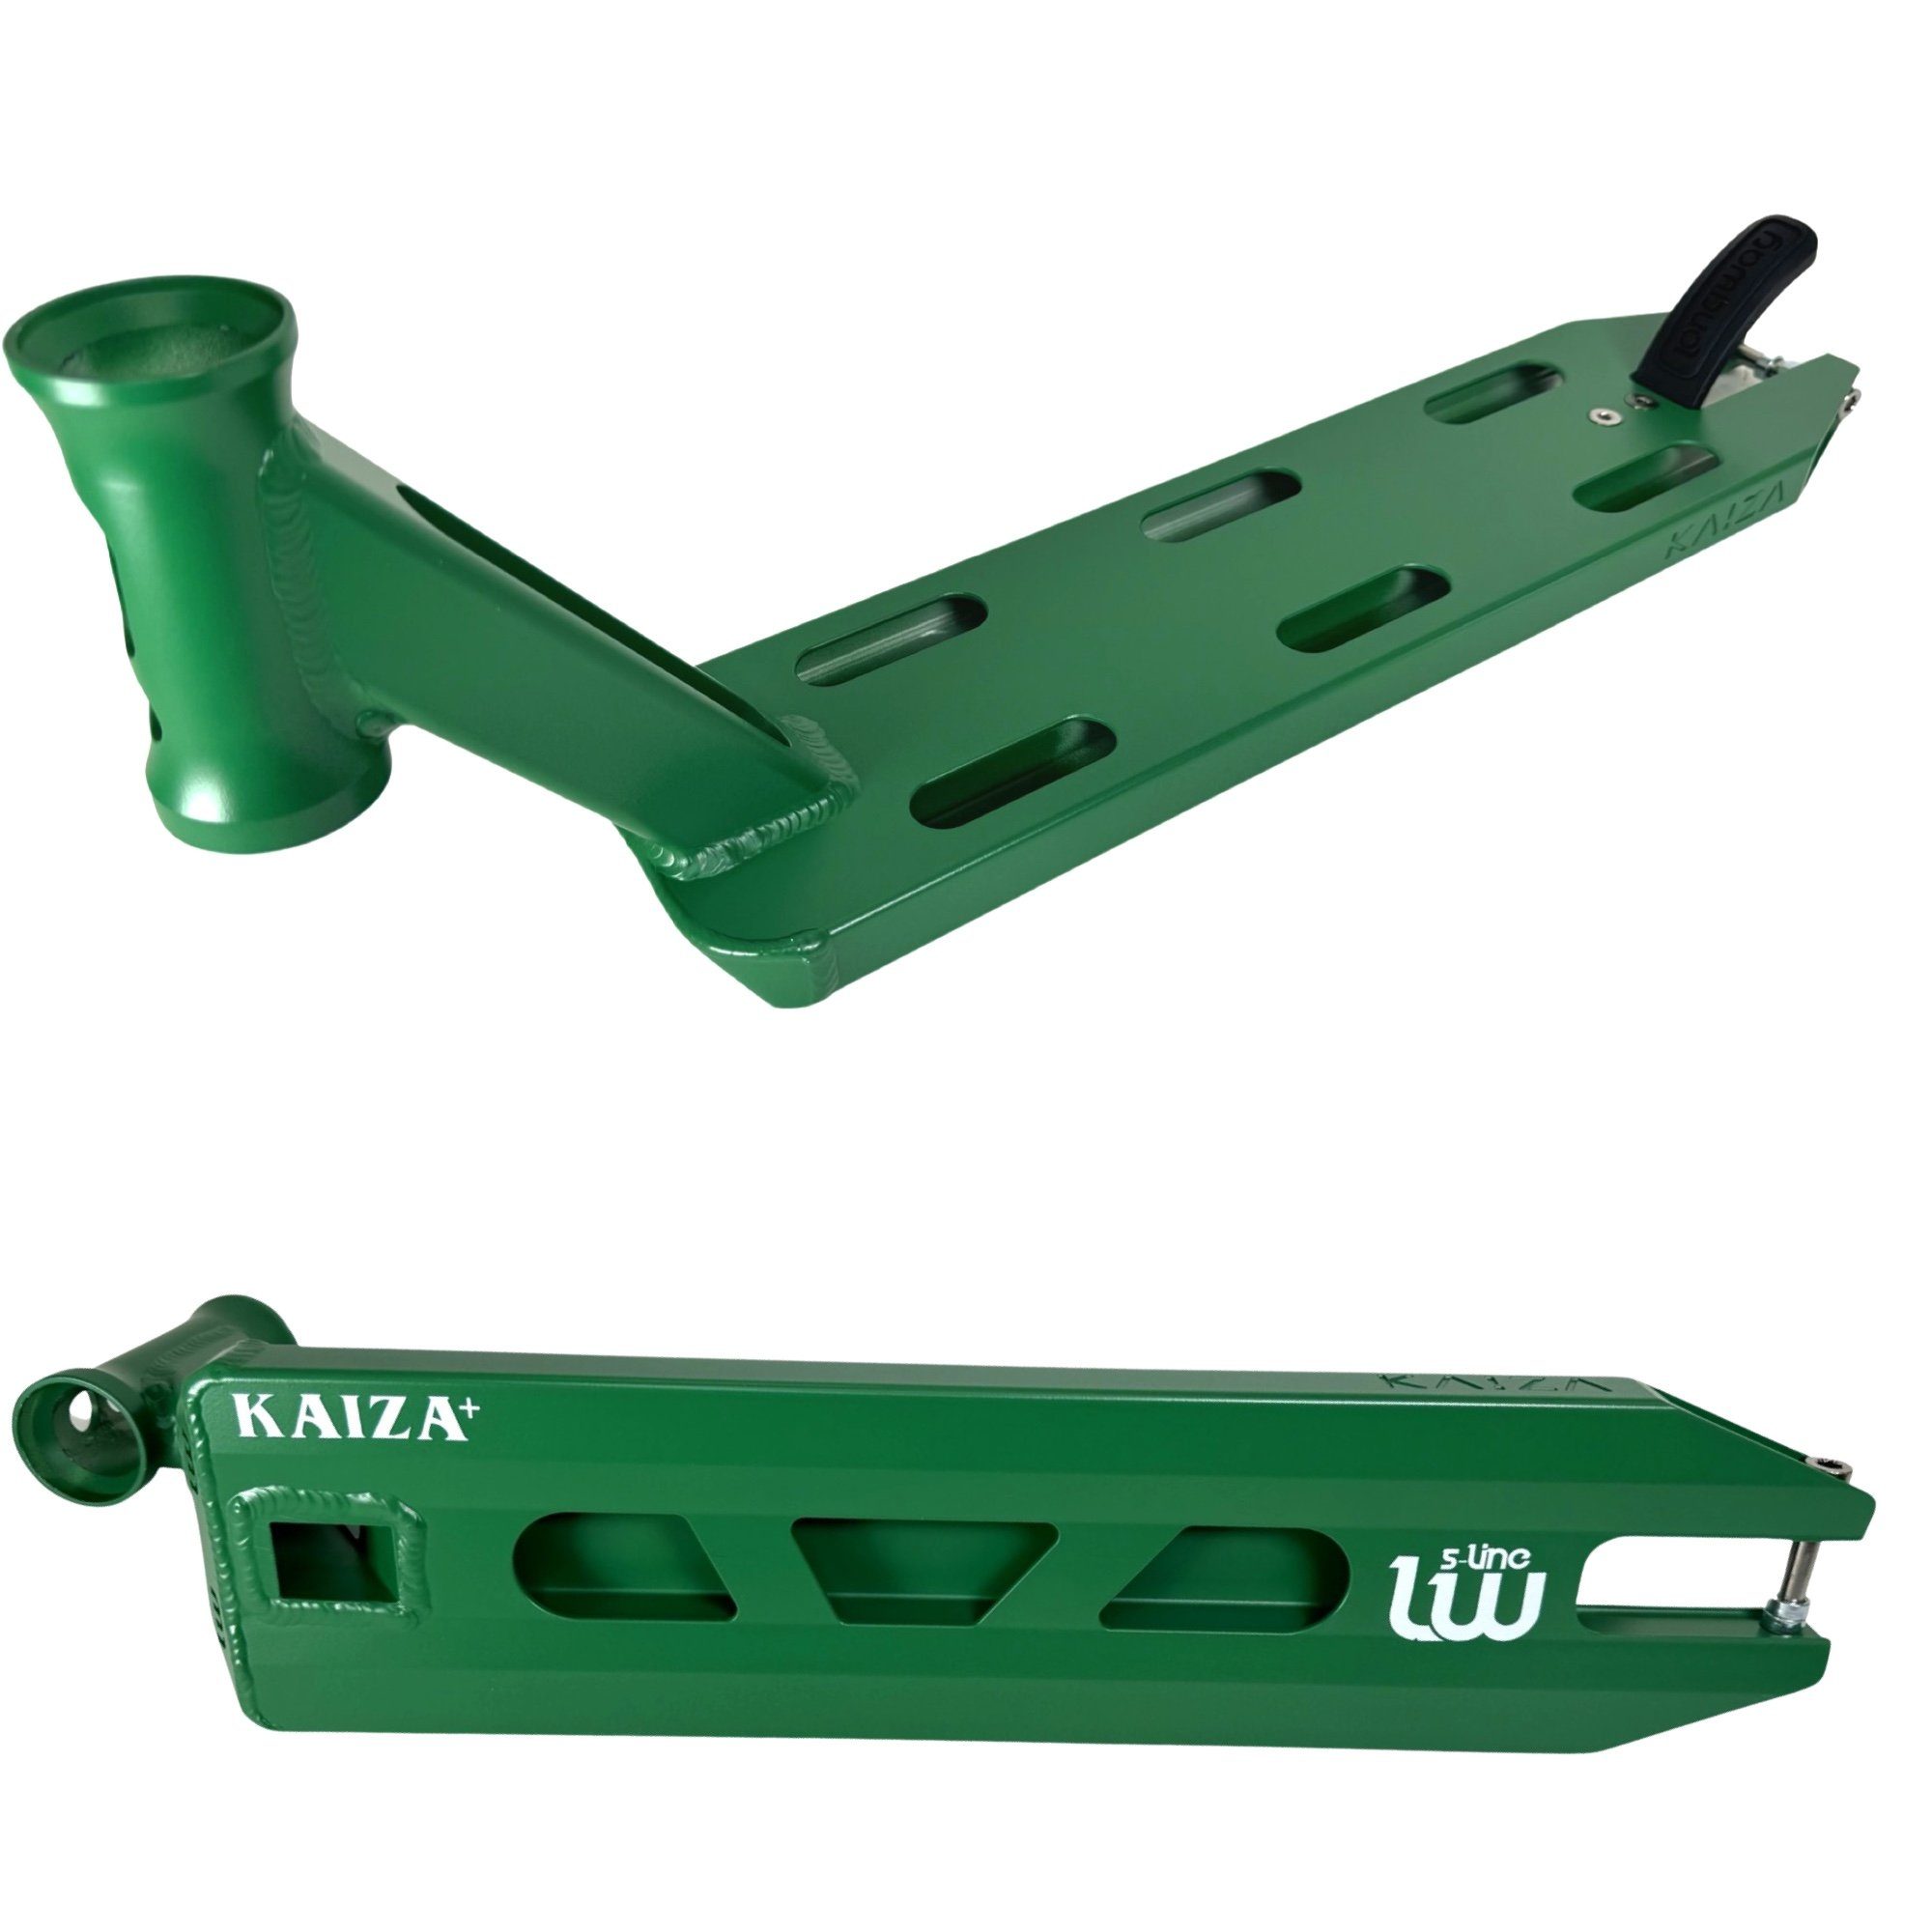 Stunt-Scooter Longway Kaiza grün Deck V3 Stuntscooter 480mm Longway Scooters 1085g